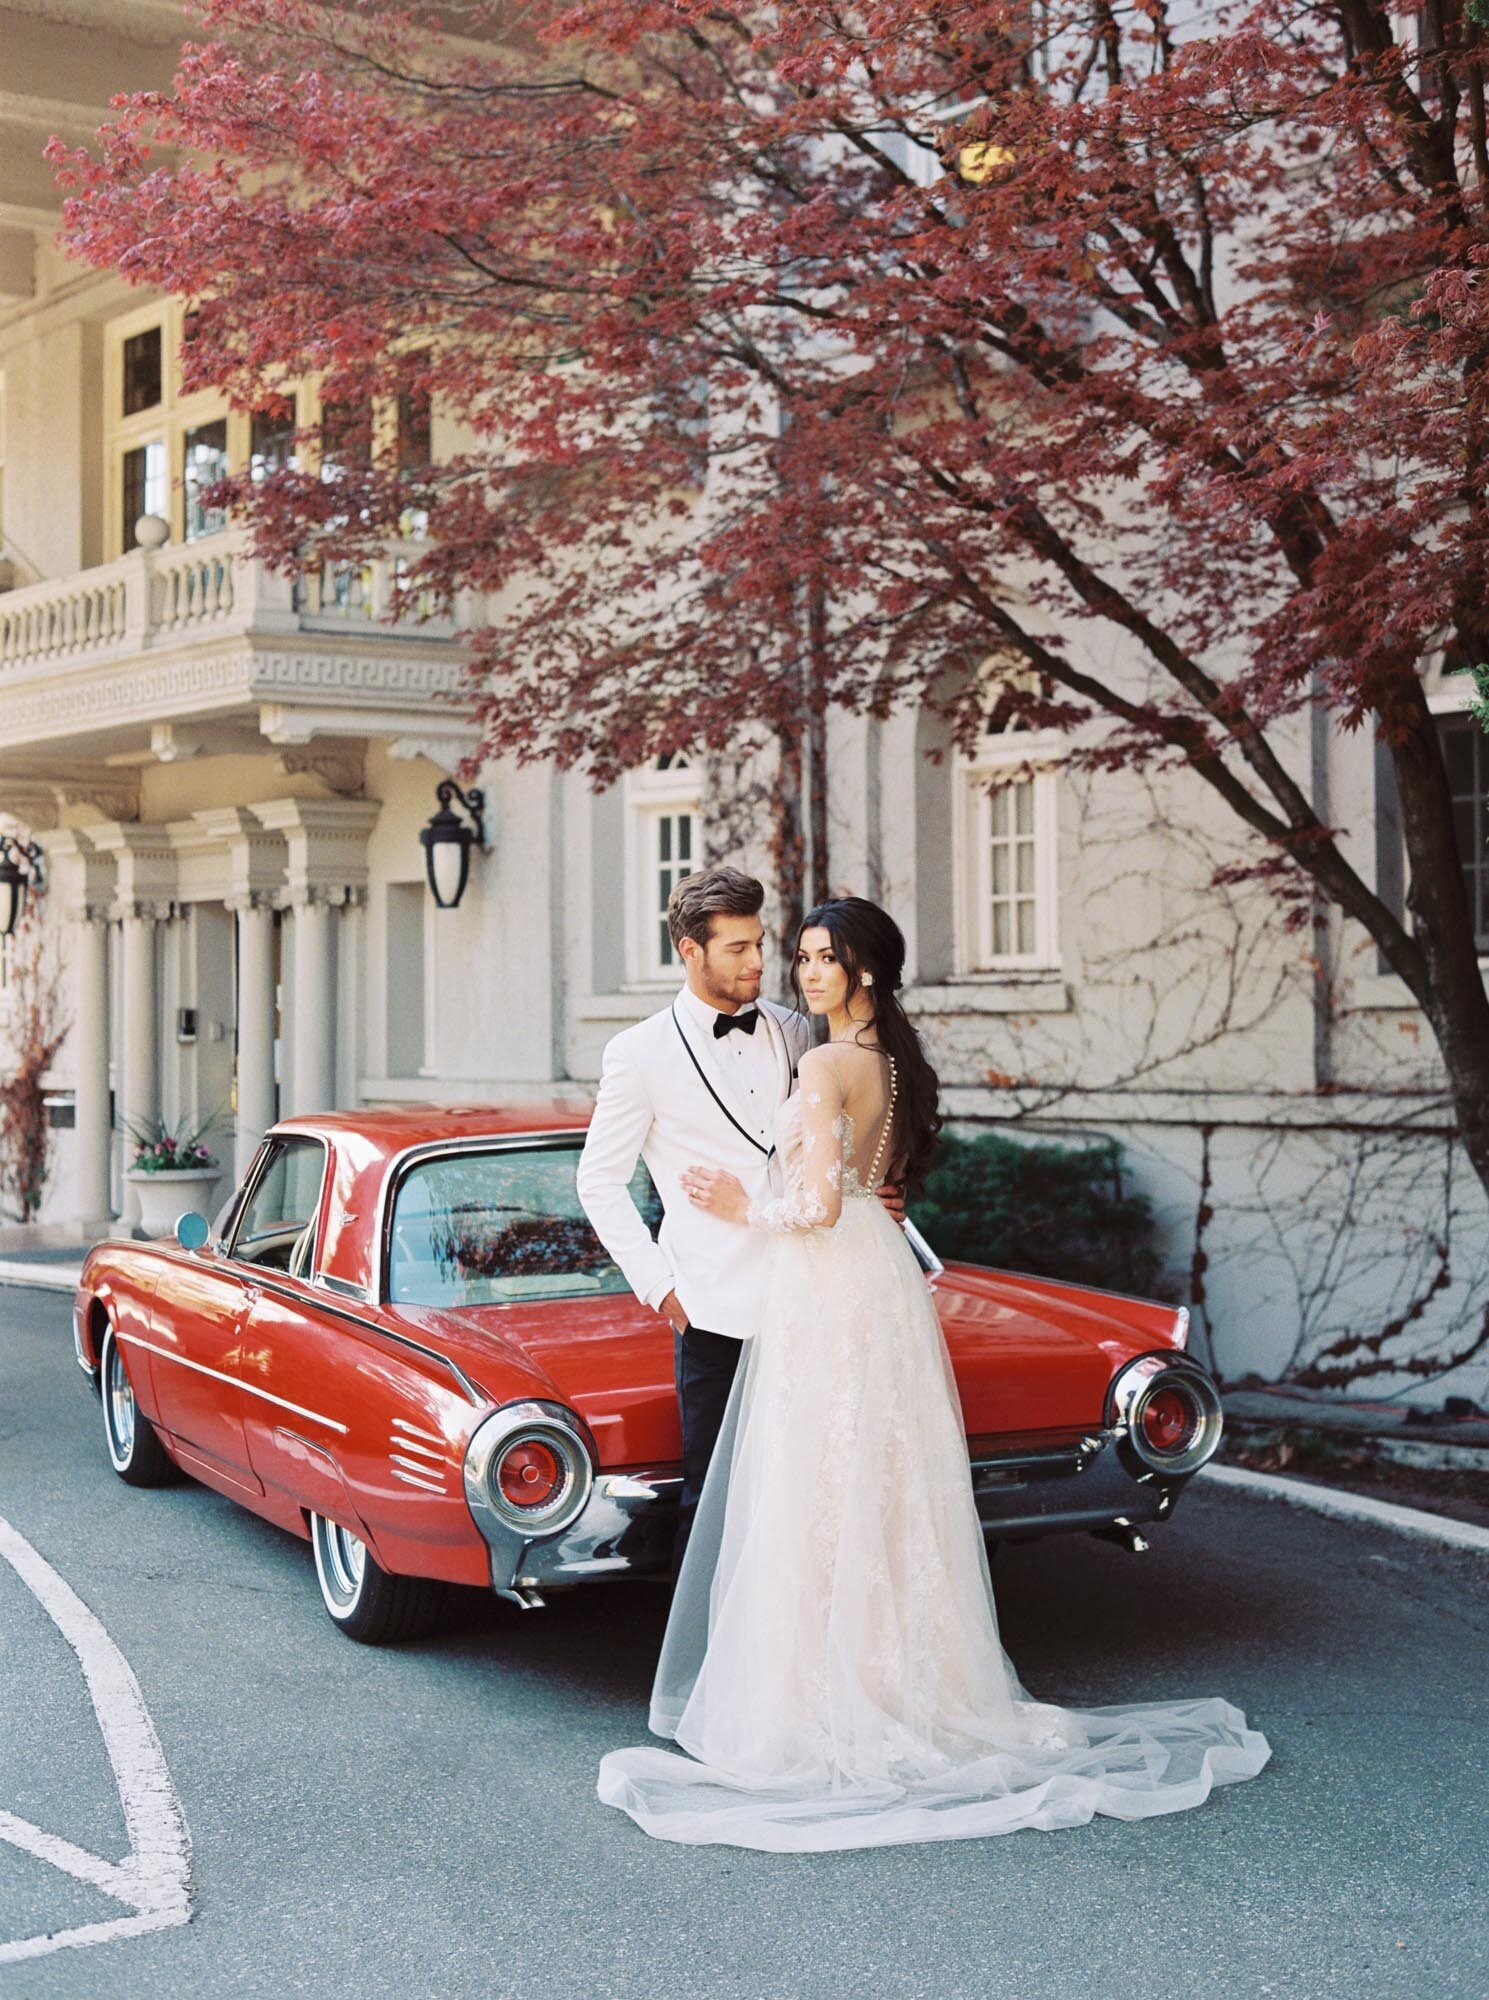 Bride and groom posing with their classic red car